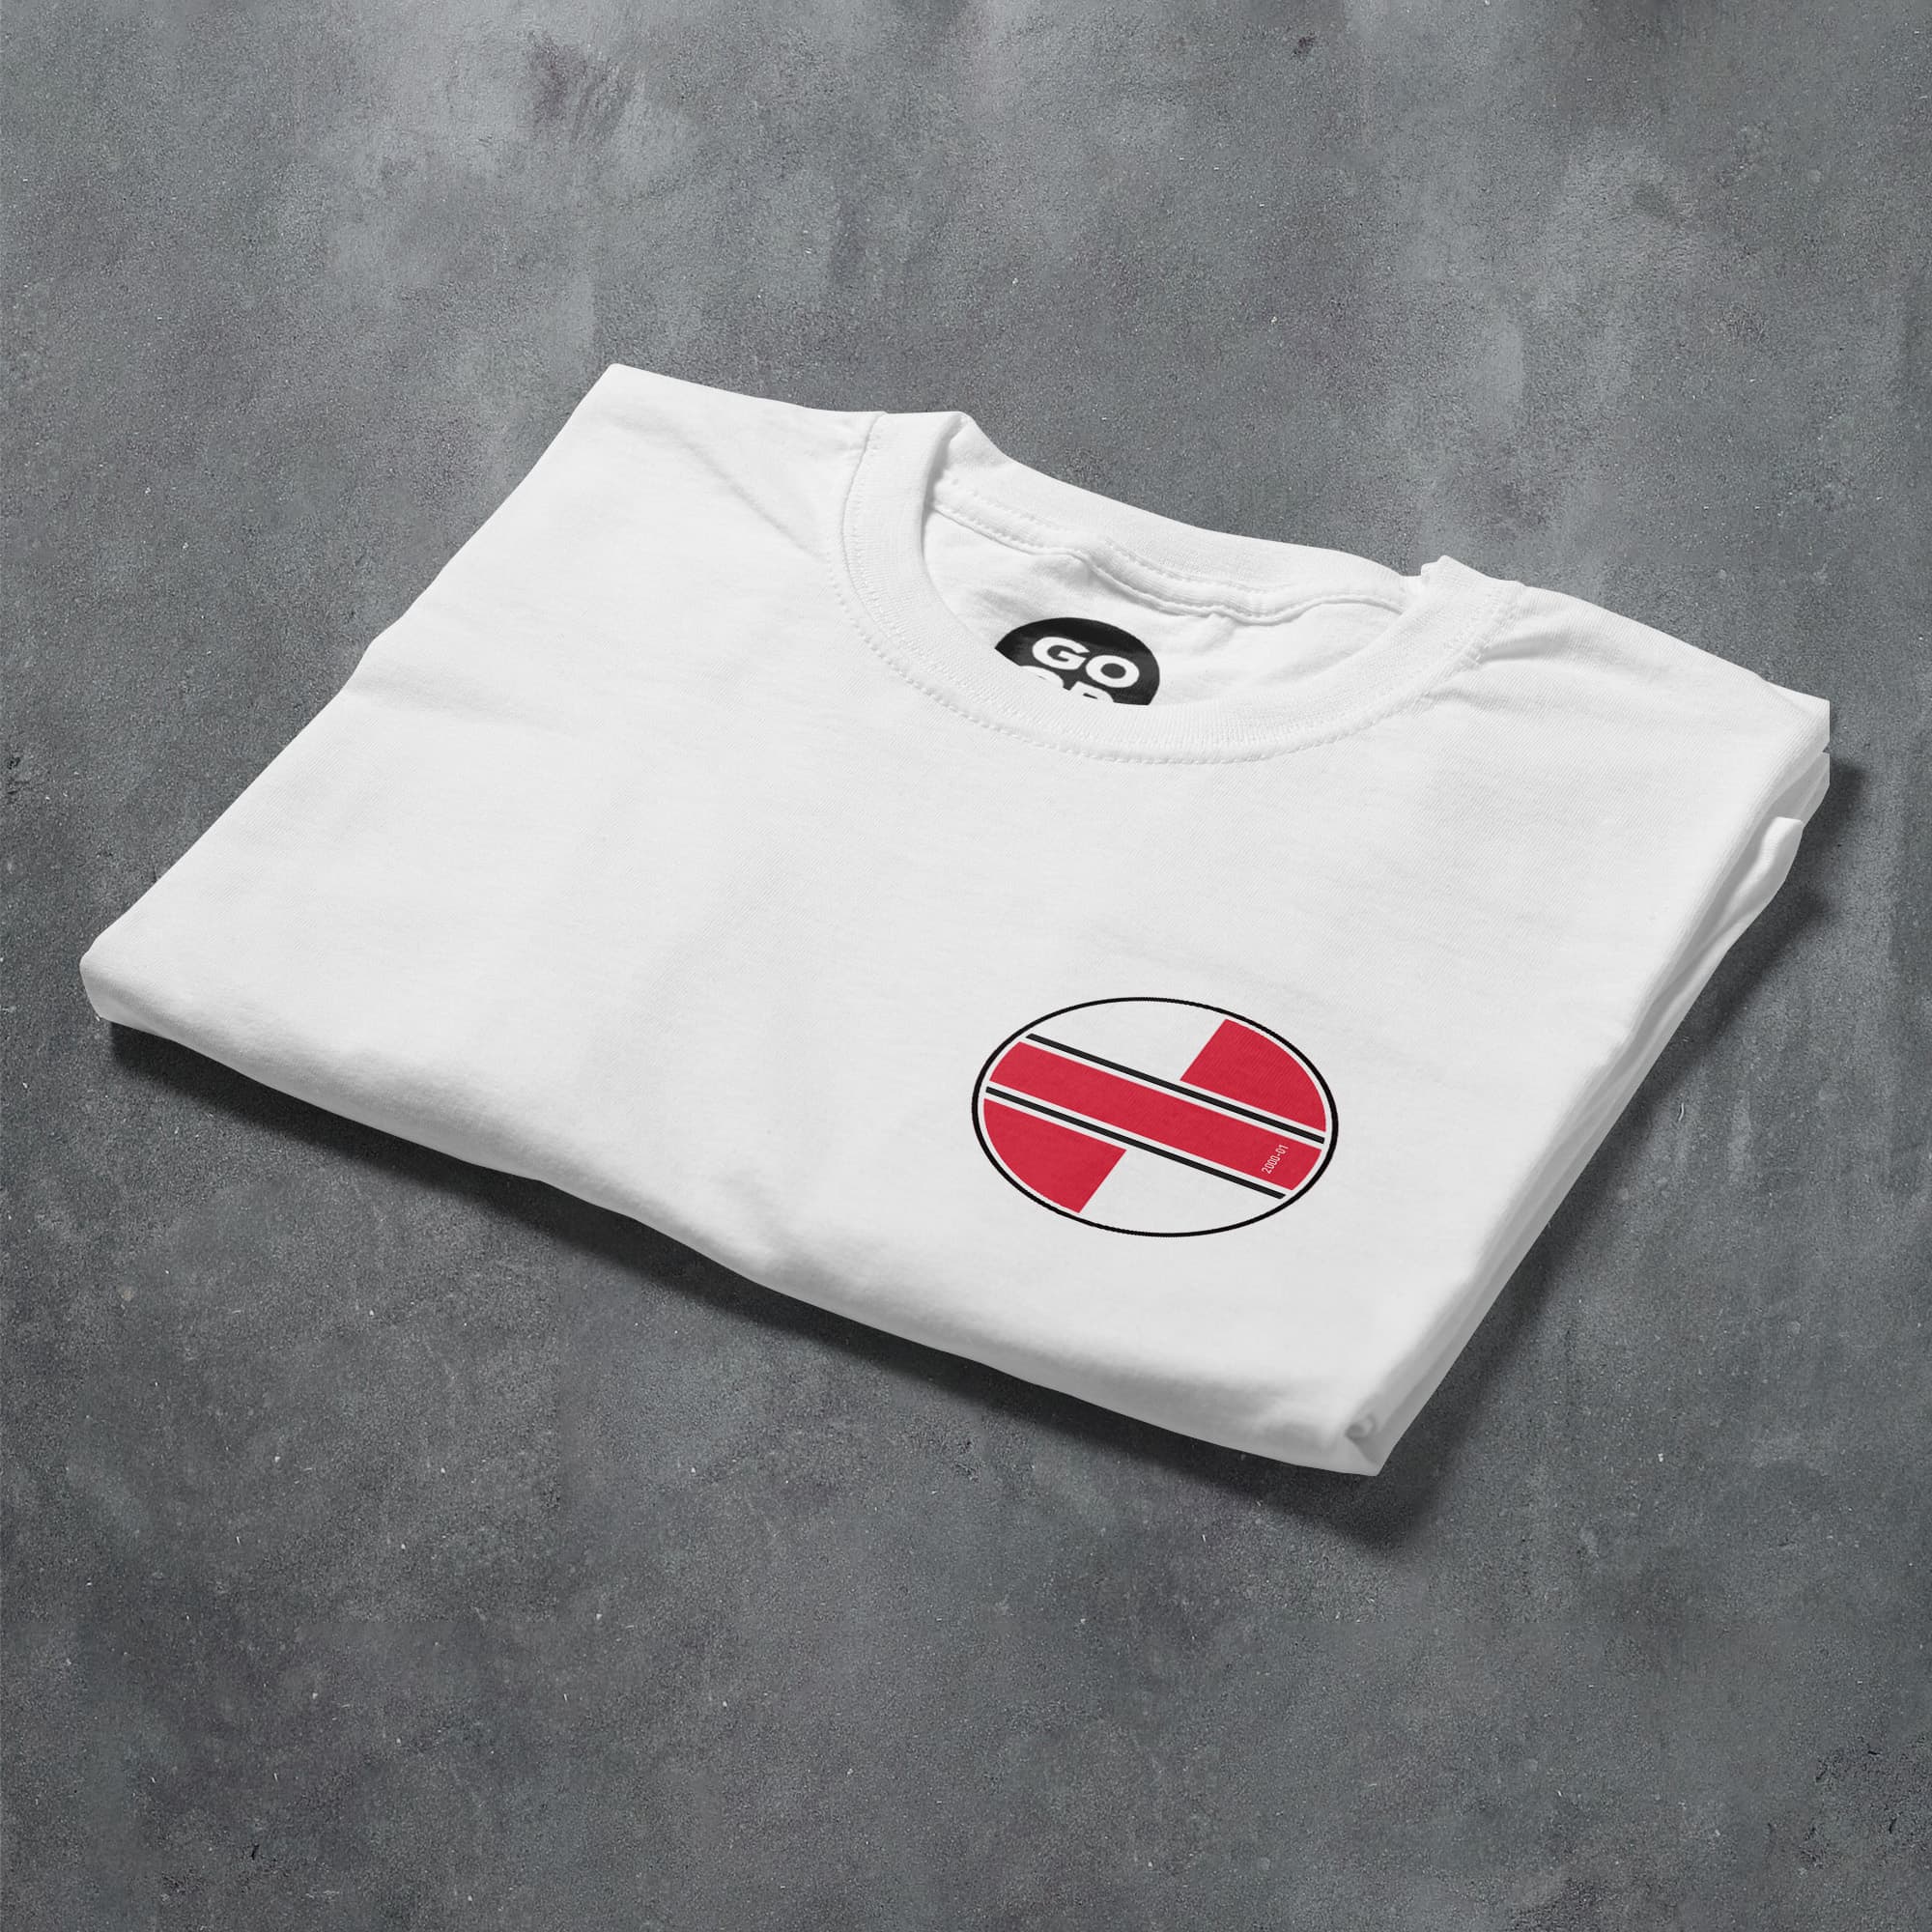 a white t - shirt with a red cross on it